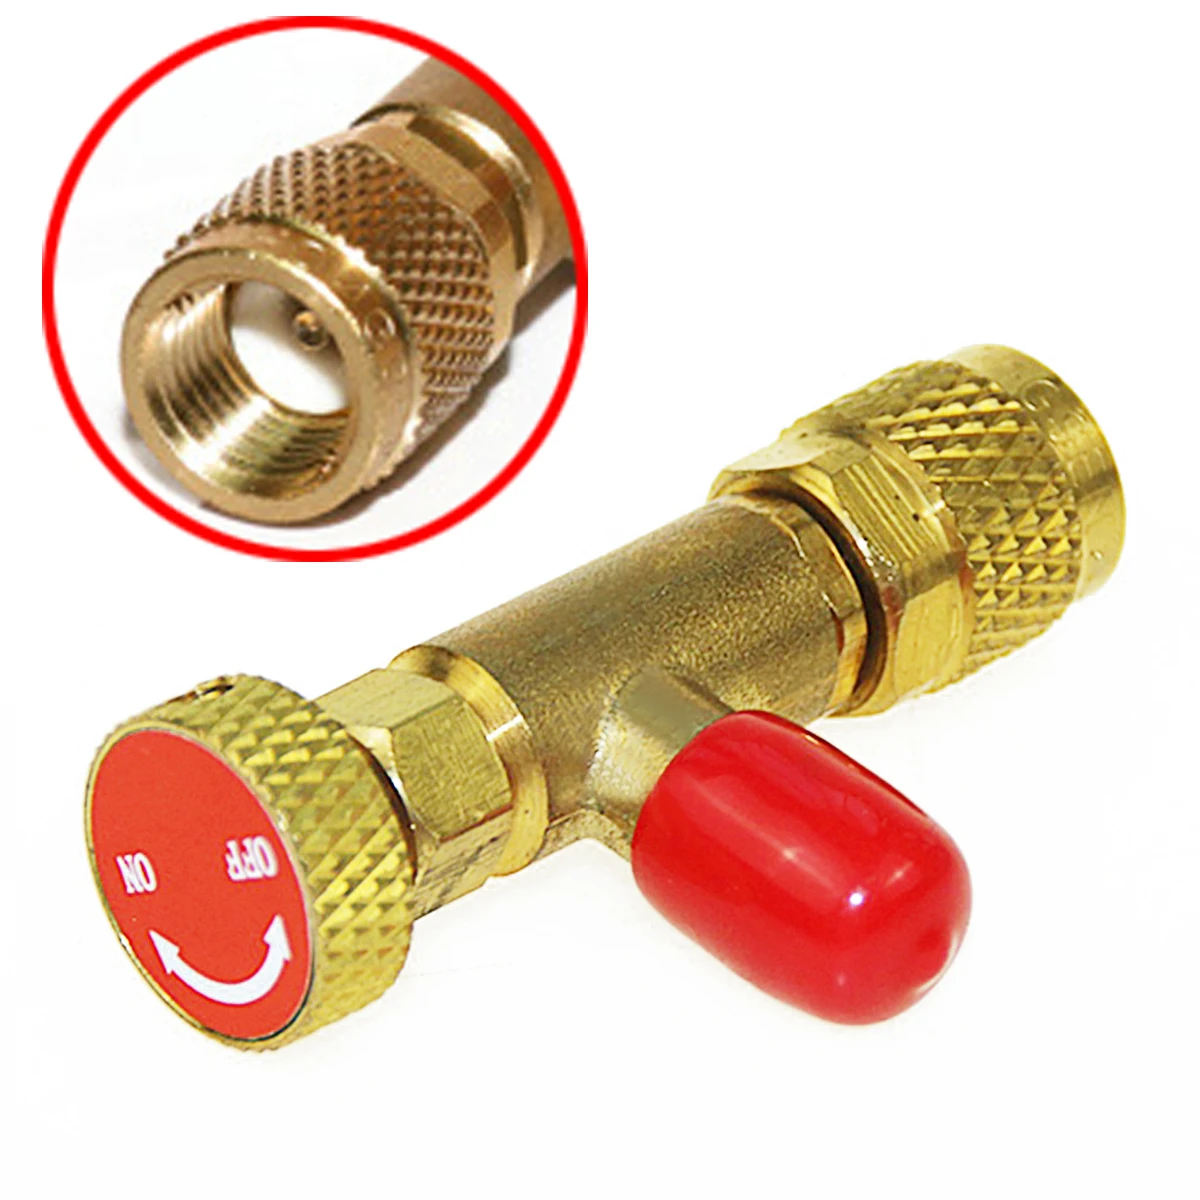 R410A Refrigeration Air conditioning Valve Safety Adapter 1/4